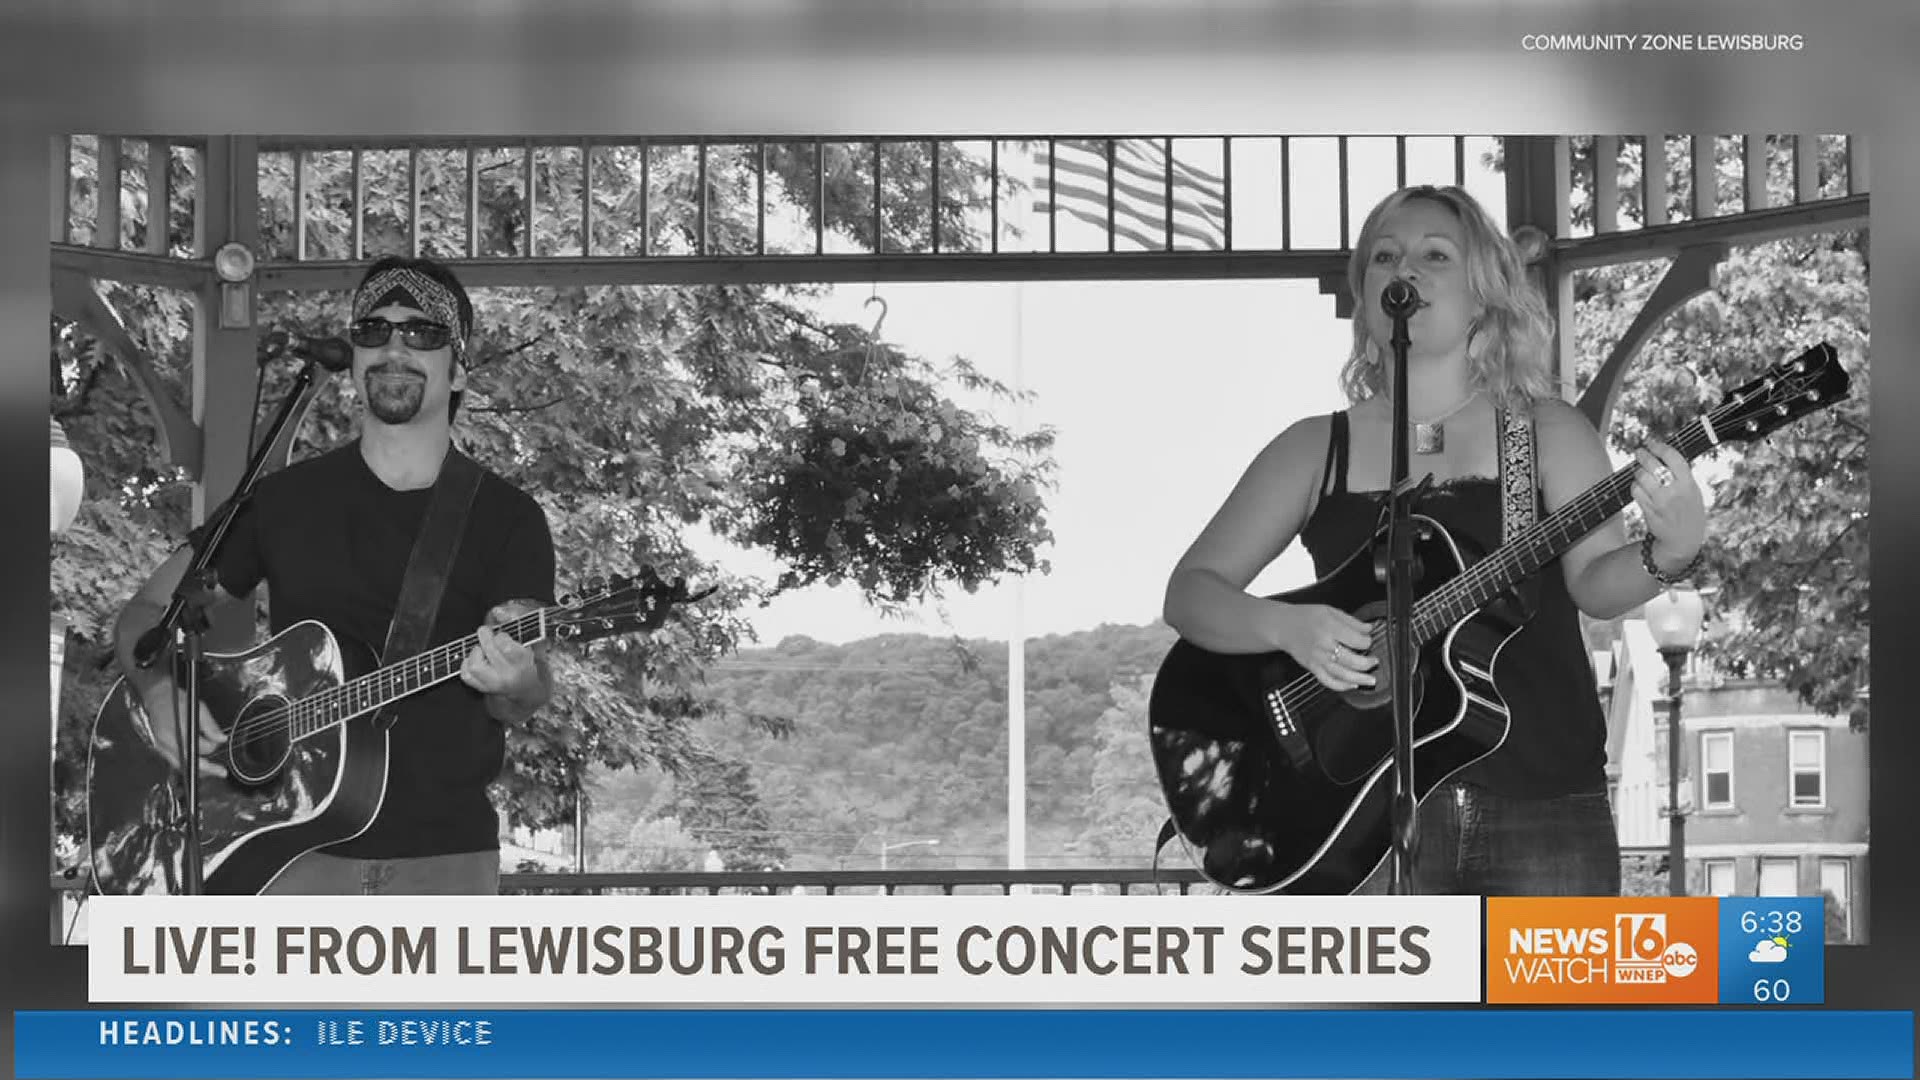 All over our area, many communities are bringing back free live concert series to celebrate towns and more!